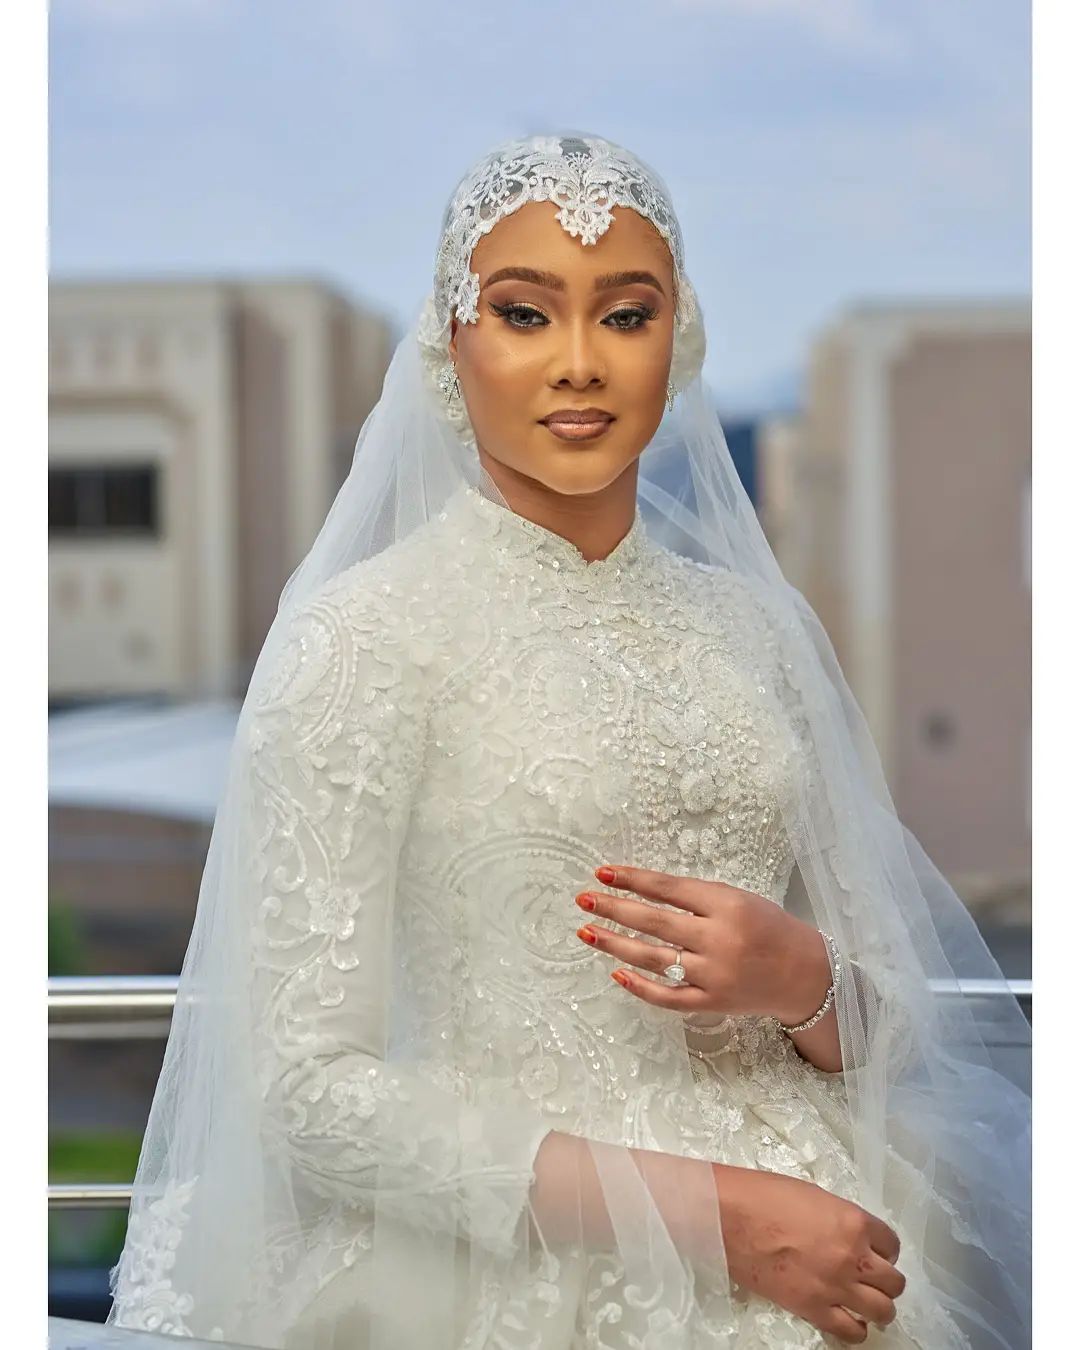 A Ray Of Sunshine!!! Bridal Inspiration For Muslimah Brides